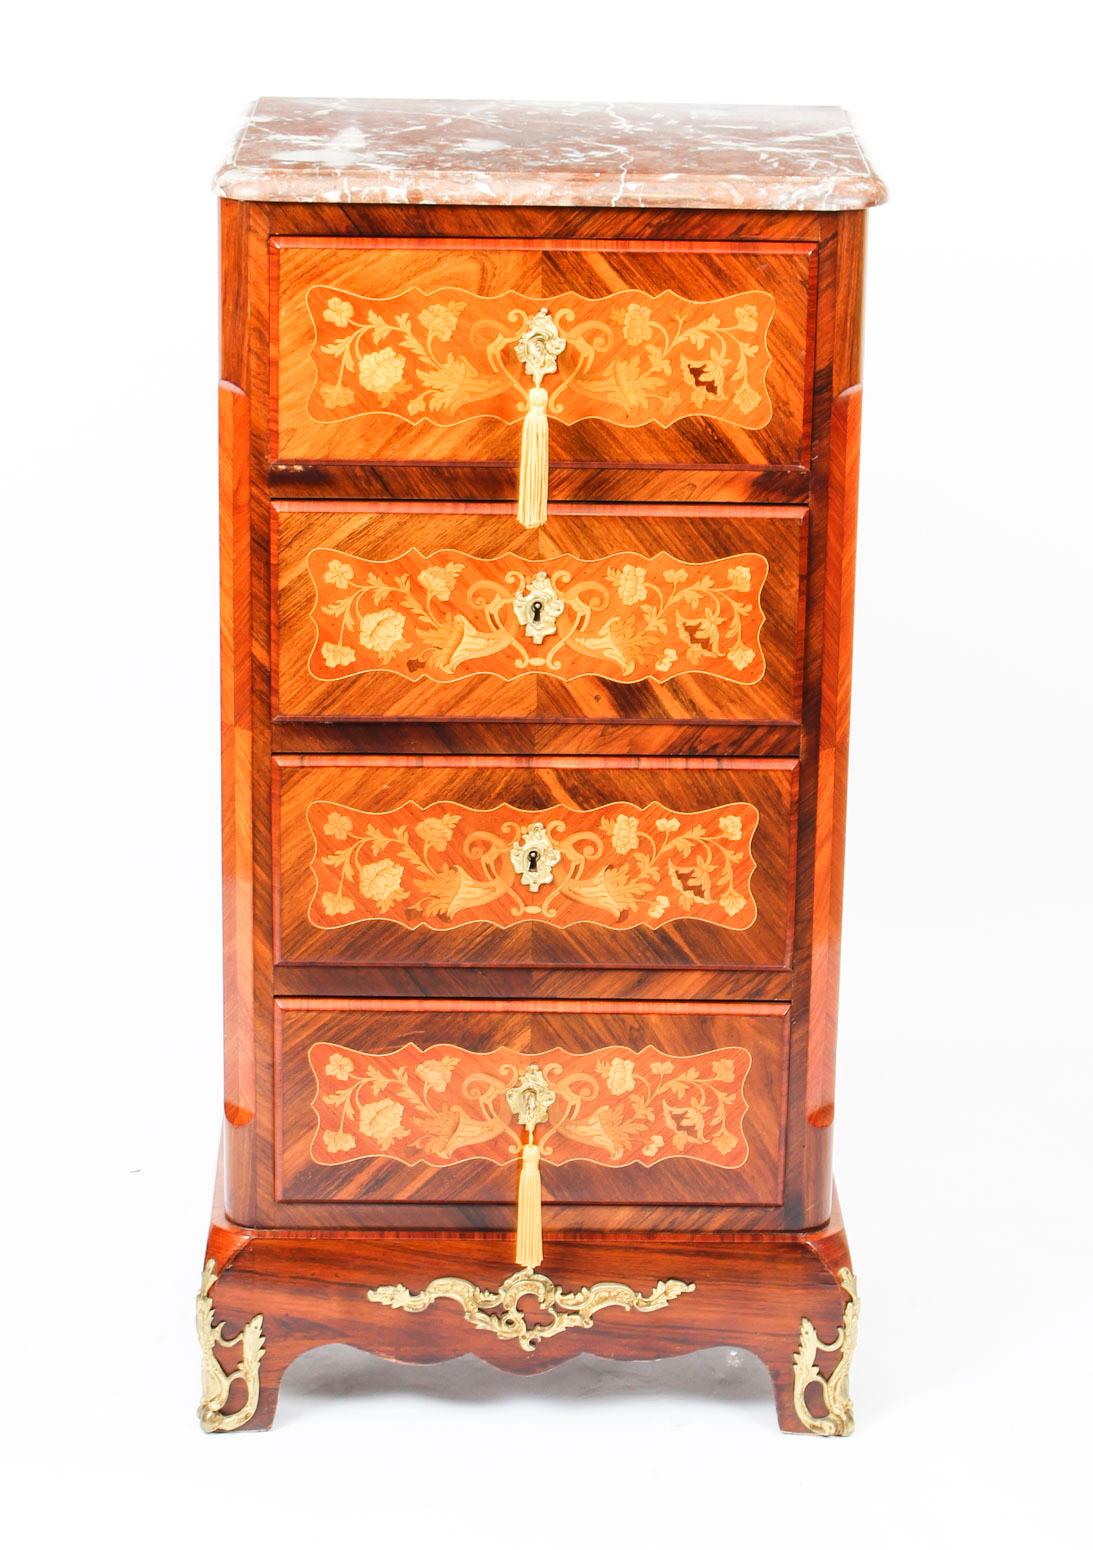 This is a beautiful antique French secretaire chest with fabulous floral marquetry decorations, circa 1860 in date. 

This piece was skillfully crafted in burr walnut and kingwood and features superb ormolu mounts.

The top drawer has a